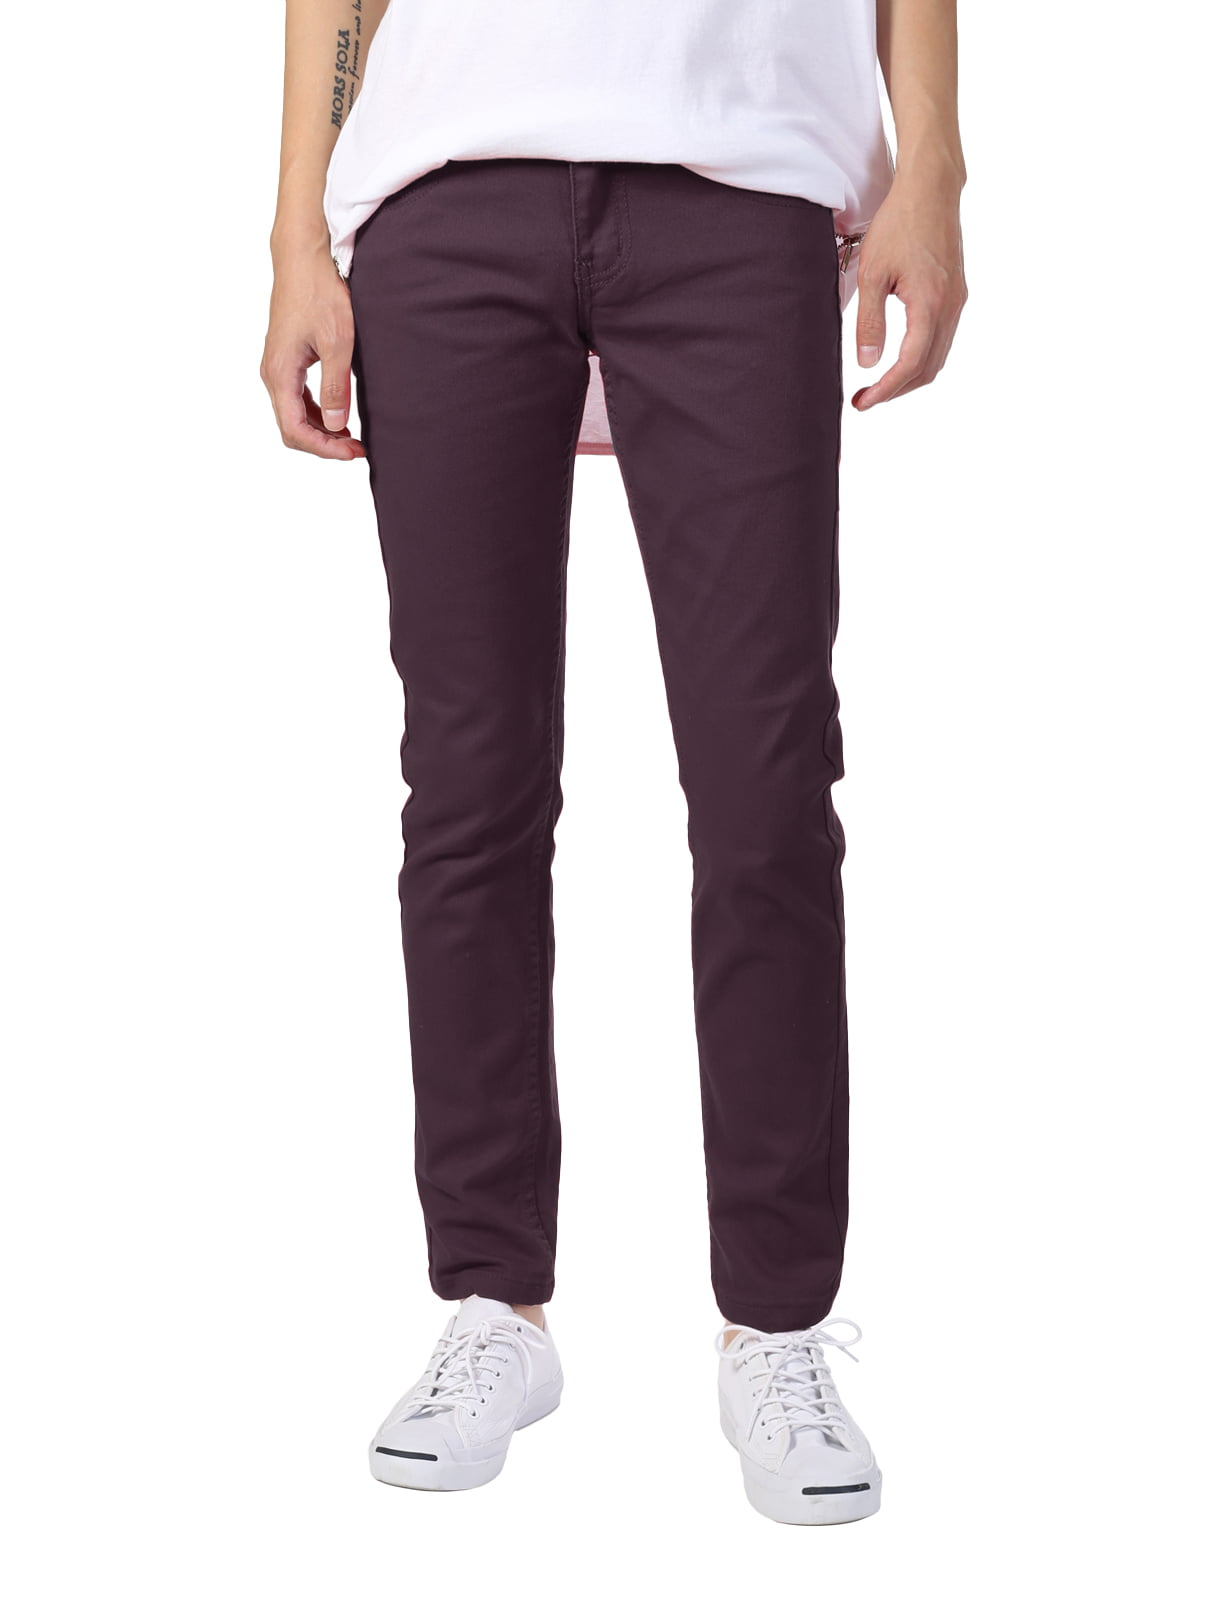 maroon color jeans